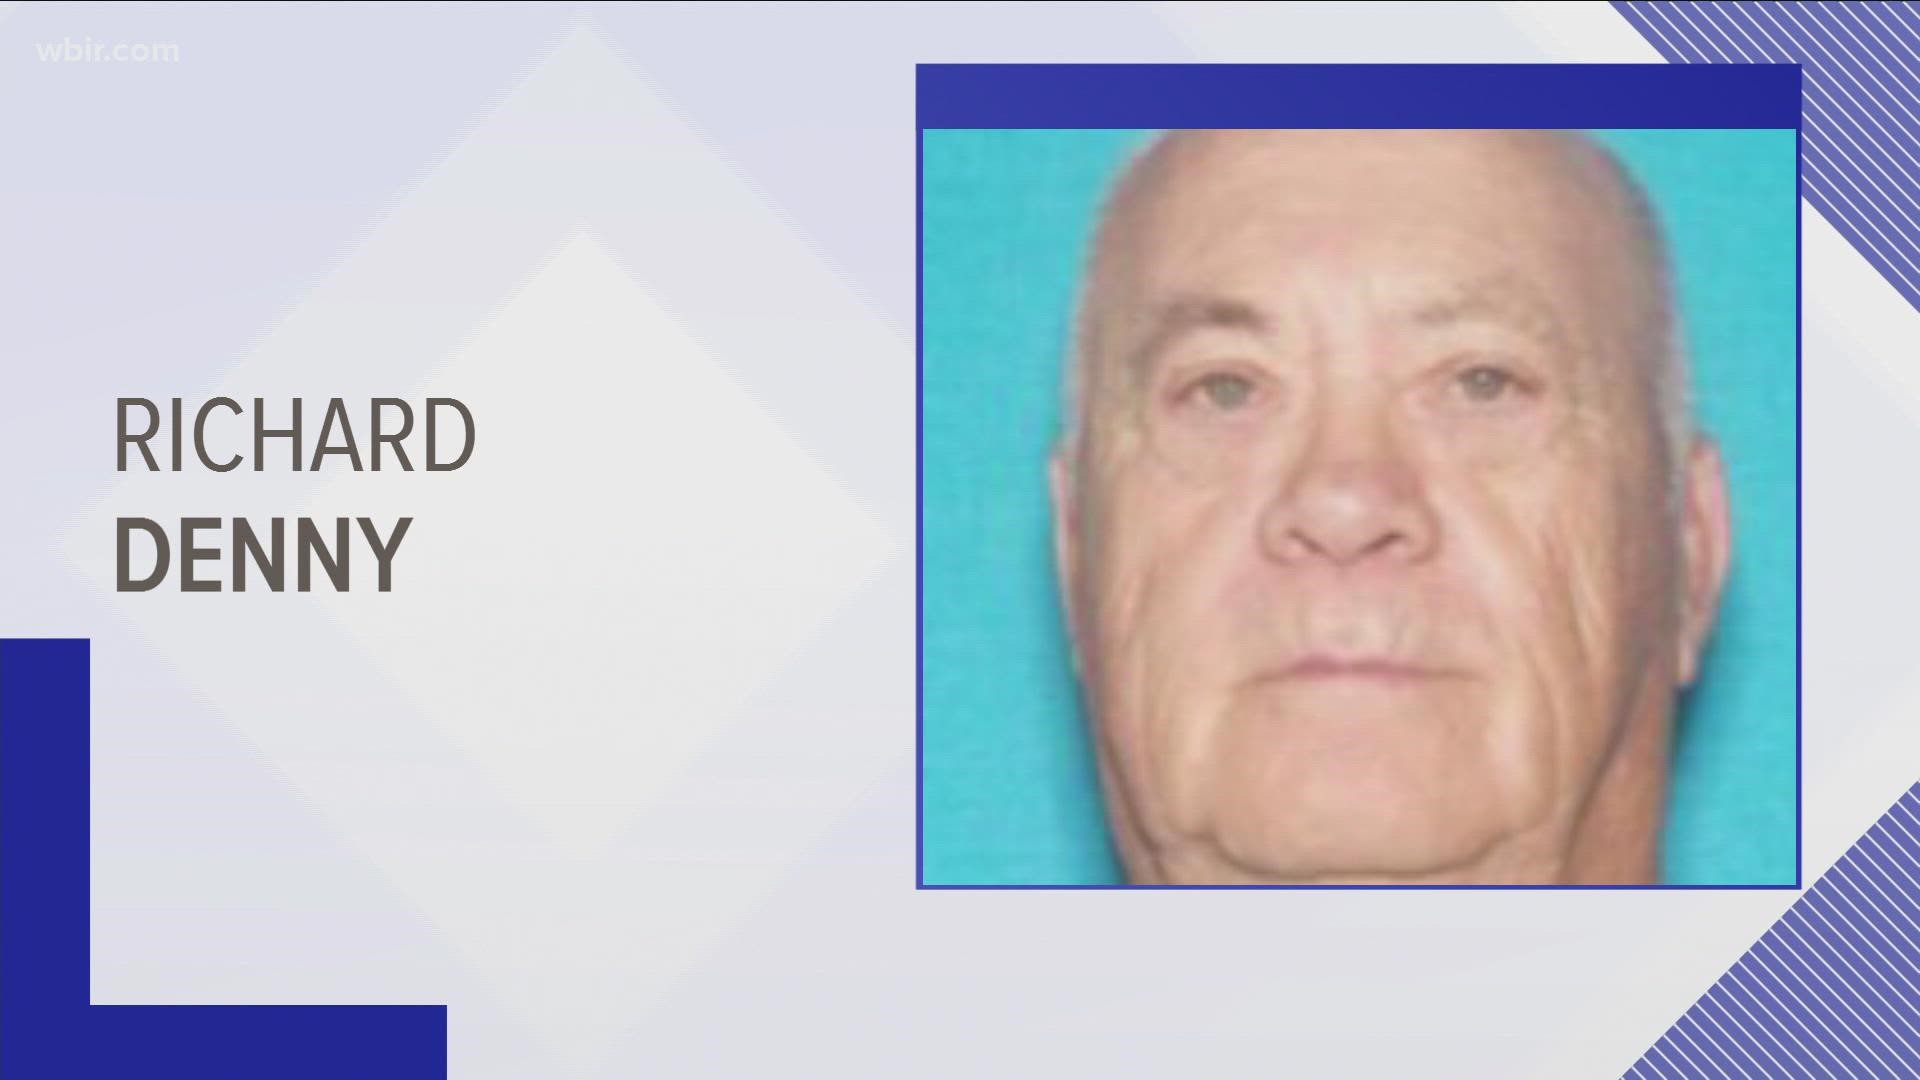 Authorities said that Richard Denny was last seen in early April at his home in Maryville.